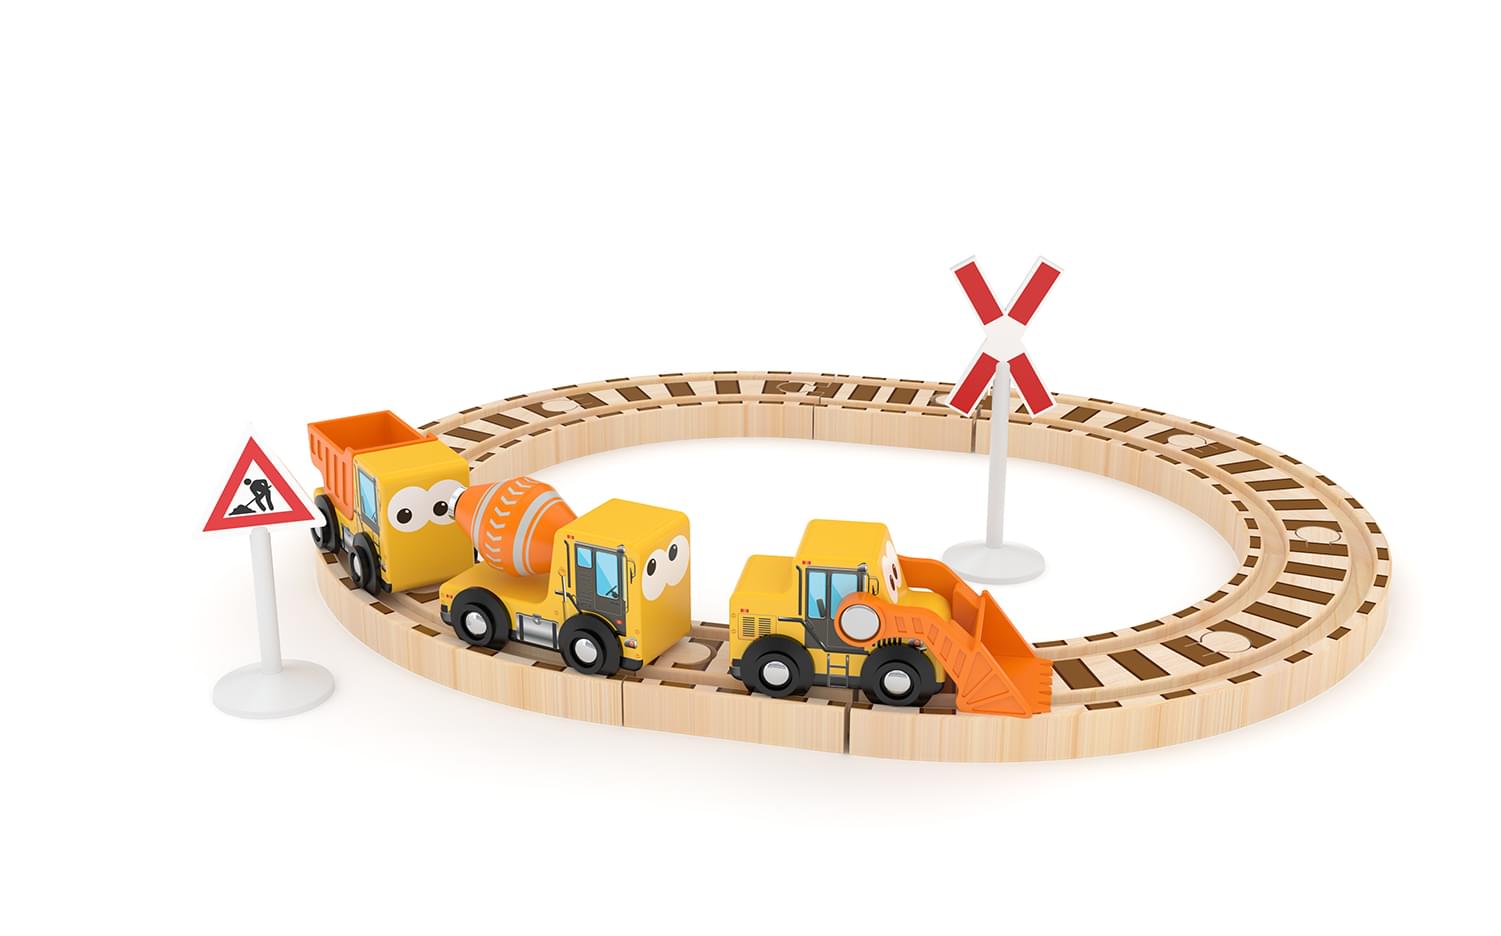 J'adore Construction Train and Rail Wooden Toy Playset